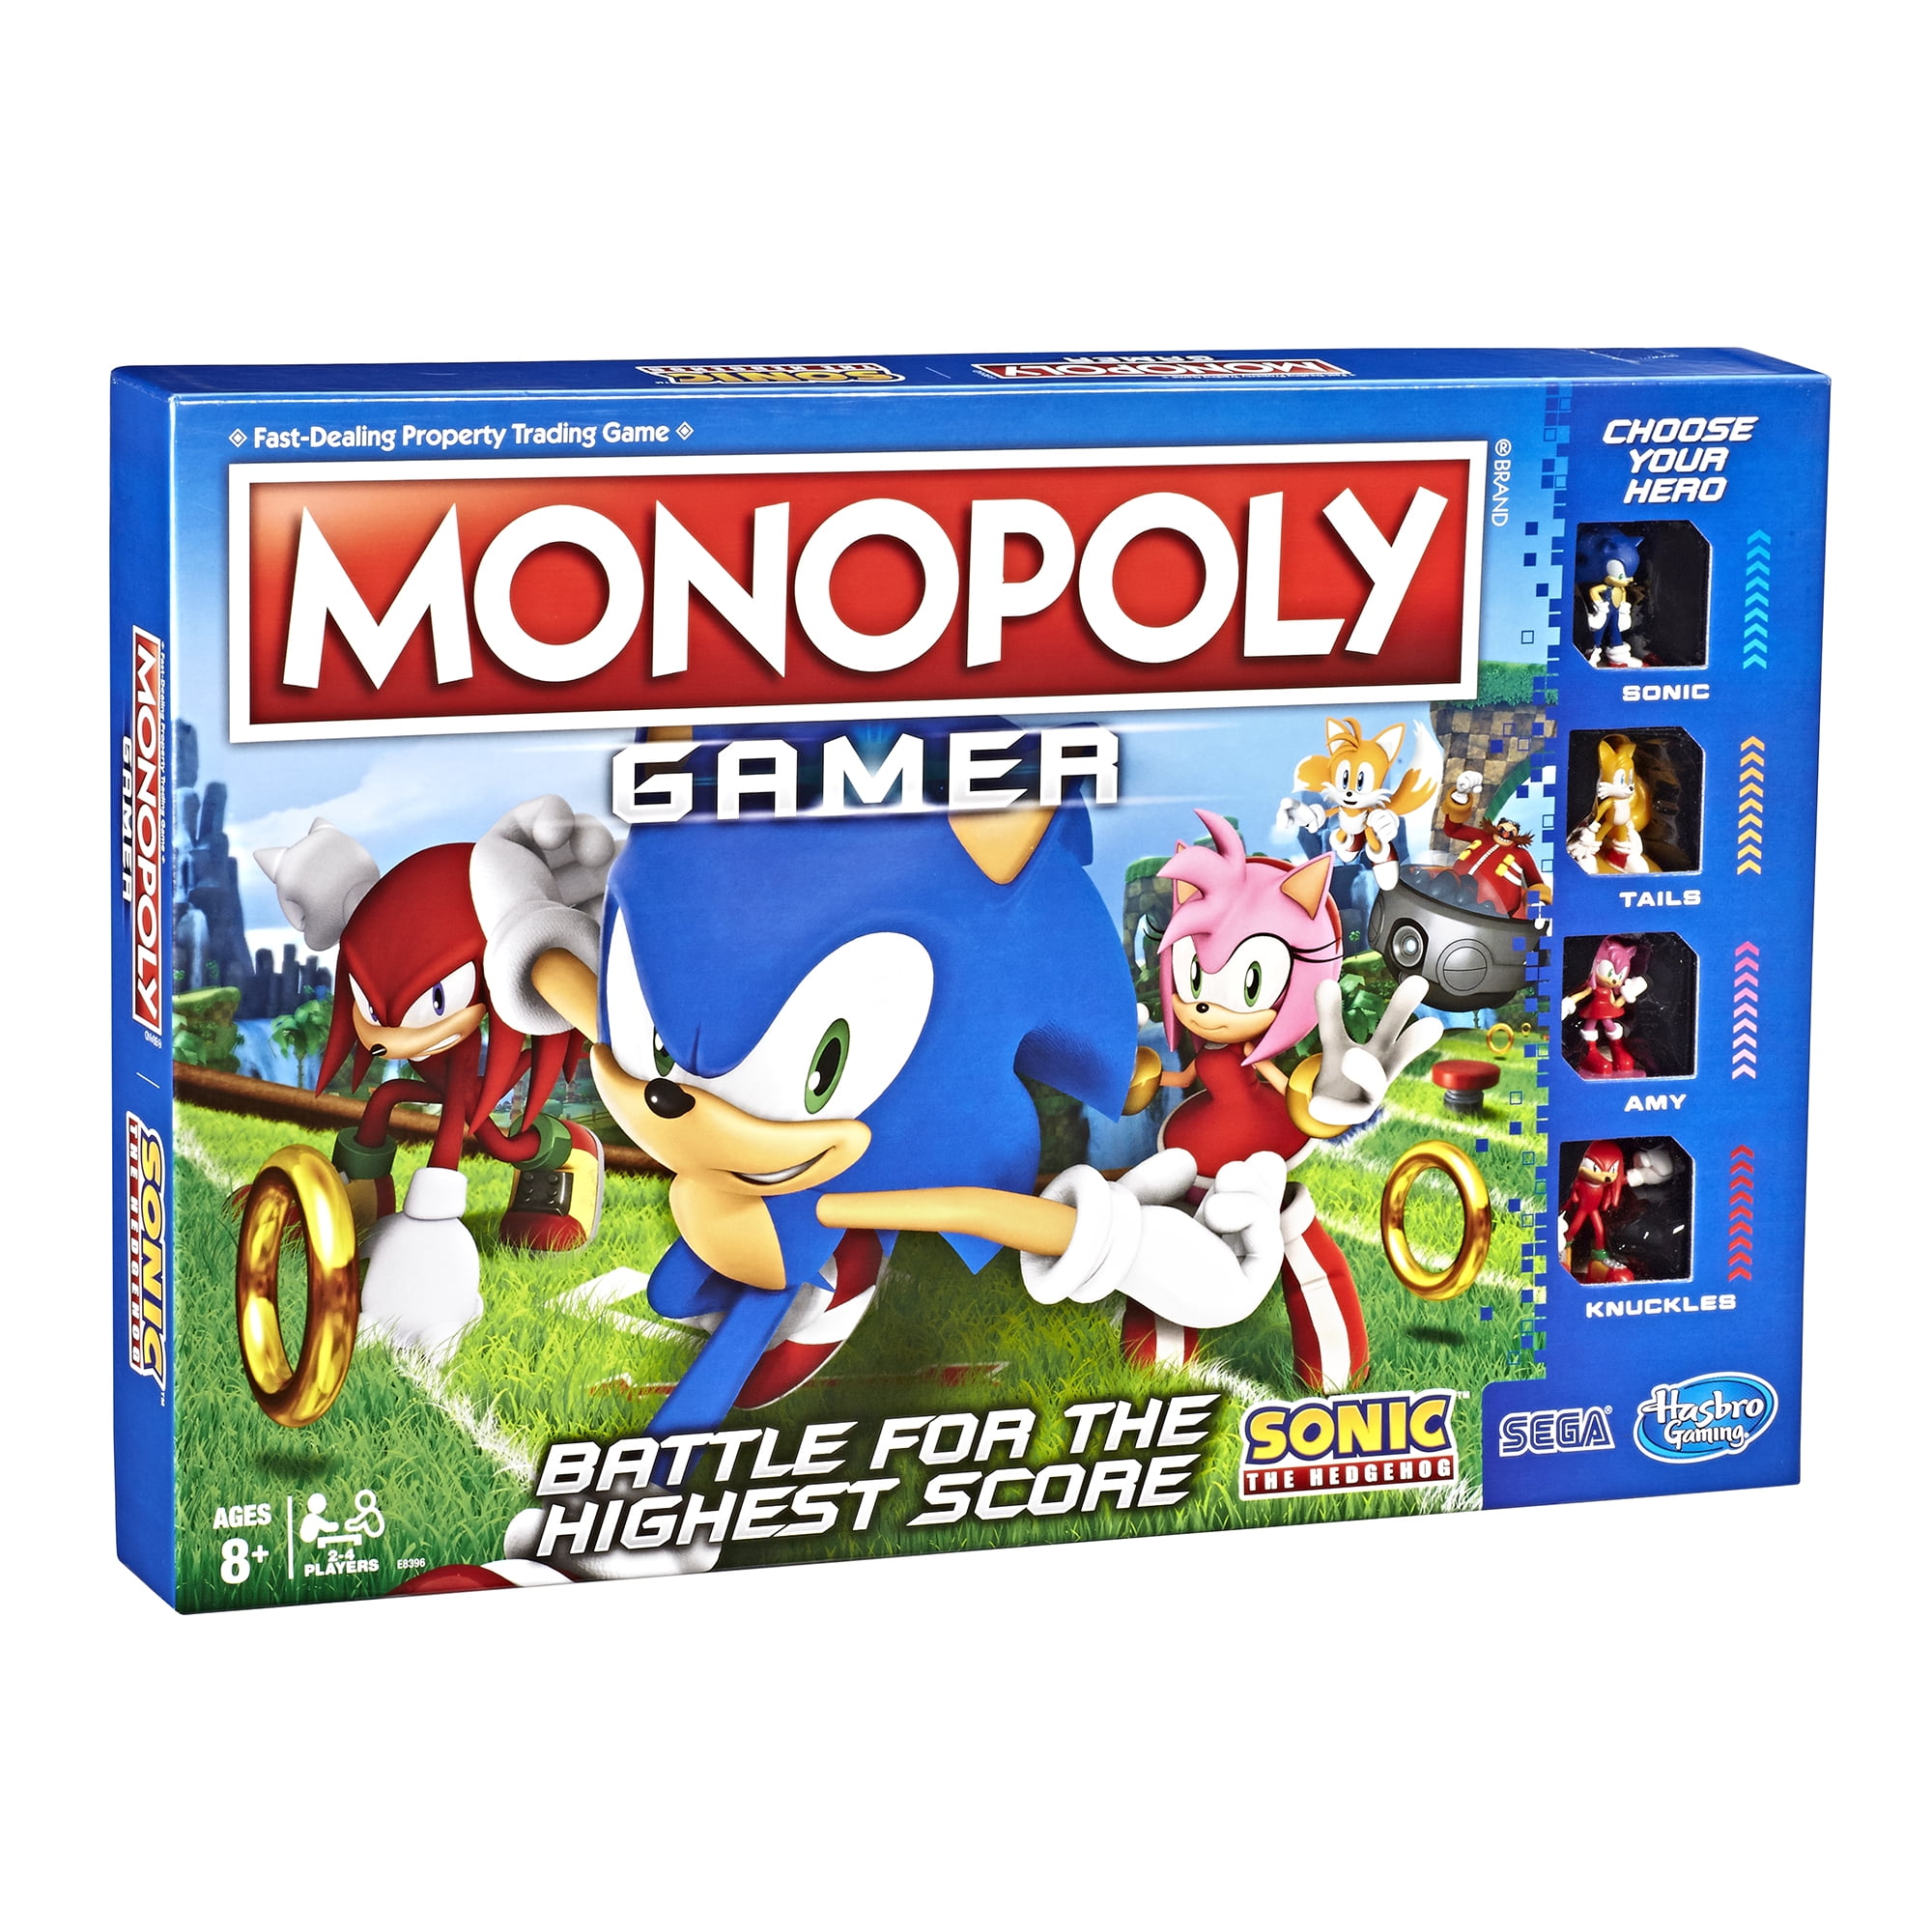 MONOPOLY GAMER SONIC THE HEDGEHOG BOARD GAME FACTORY SEALED !! 